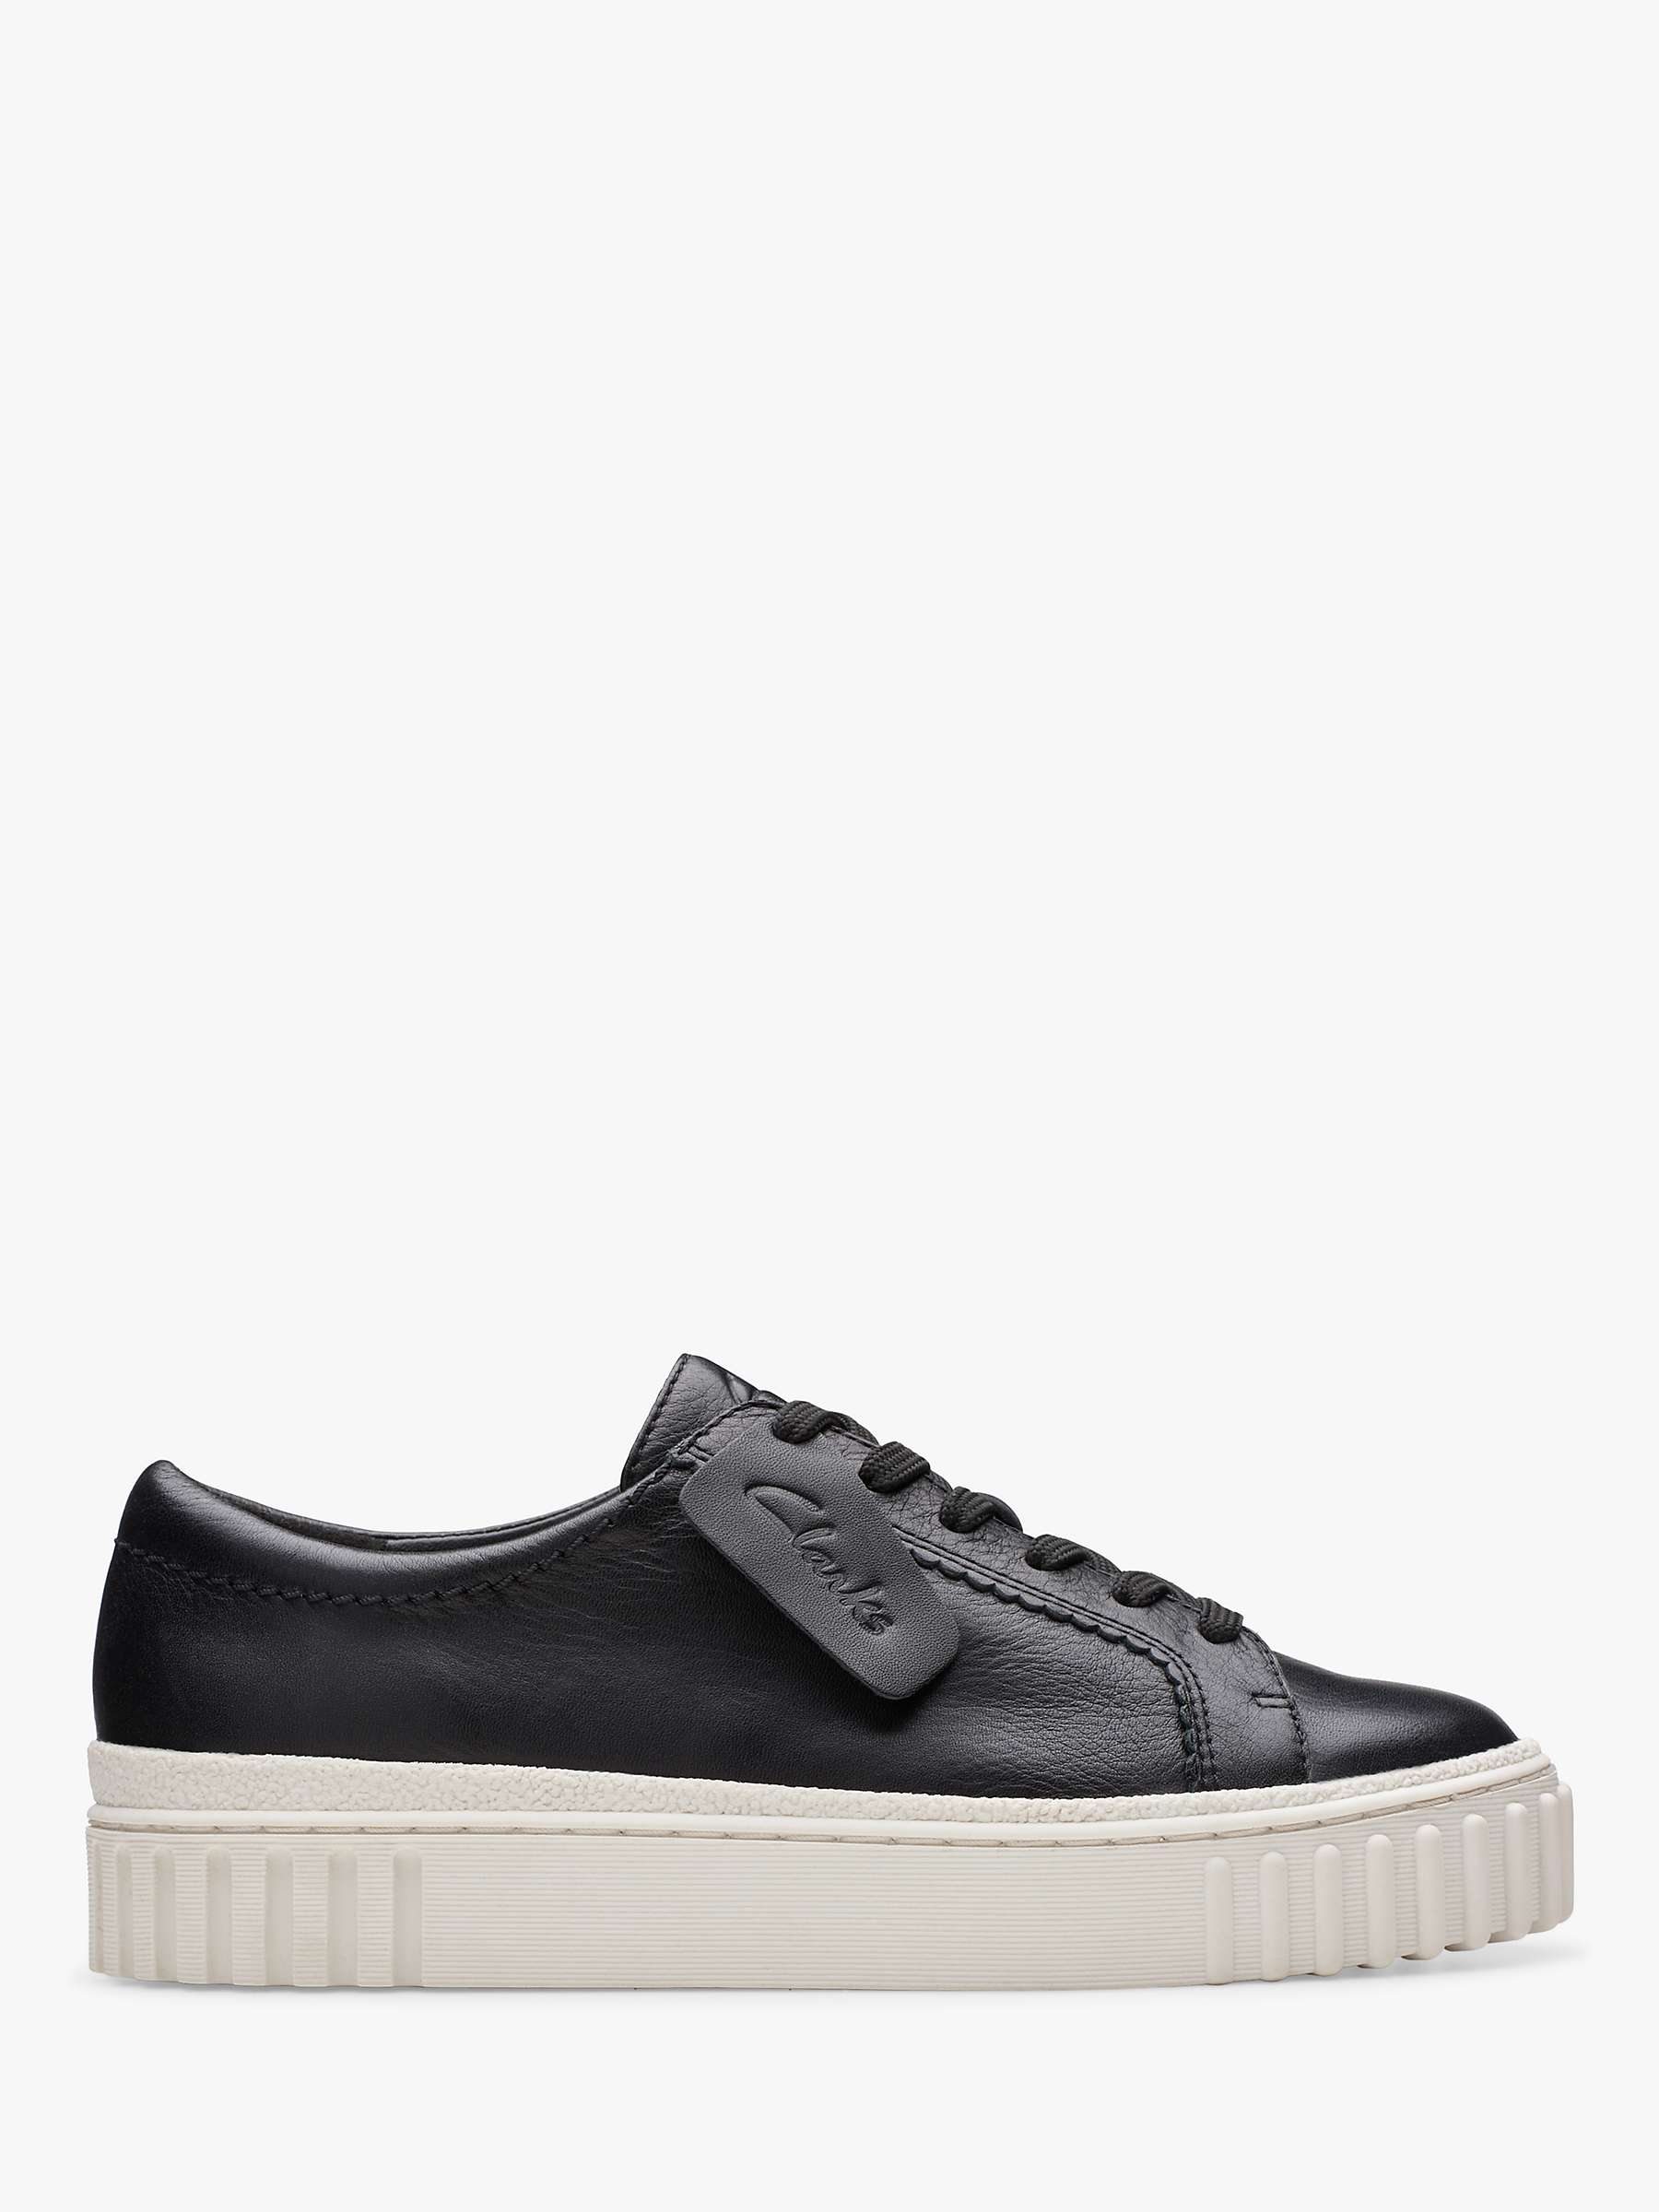 Buy Clarks Mayhill Walk Leather Trainers, Black Online at johnlewis.com